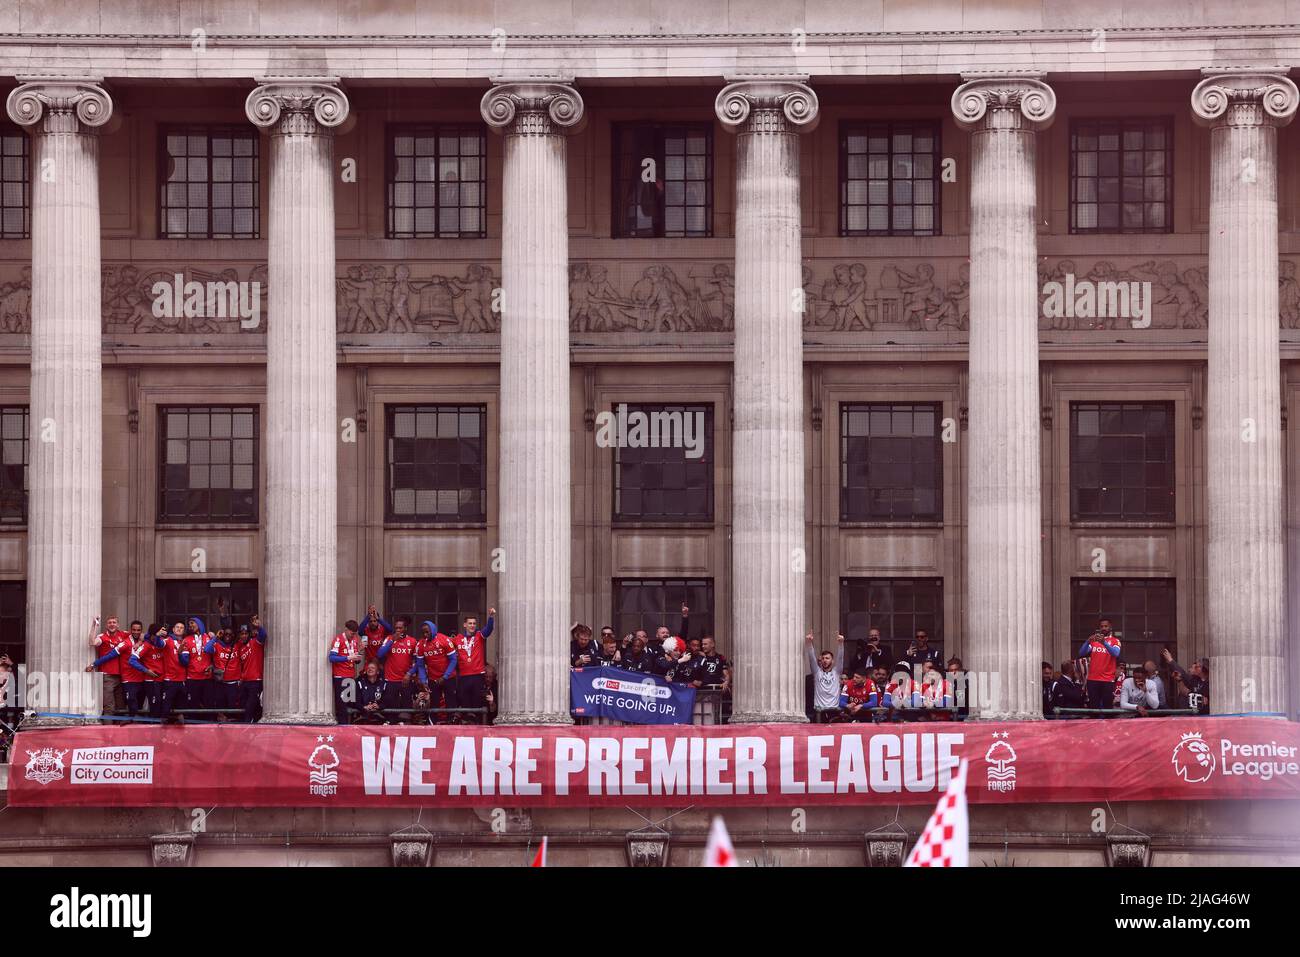 Nottingham, Nottinghamshire, UK. 30th May 2022. The Nottingham Forest soccer team celebrate their promotion to the Premier League on the balcony of the Council Building. Credit Darren Staples/Alamy Live News. Stock Photo